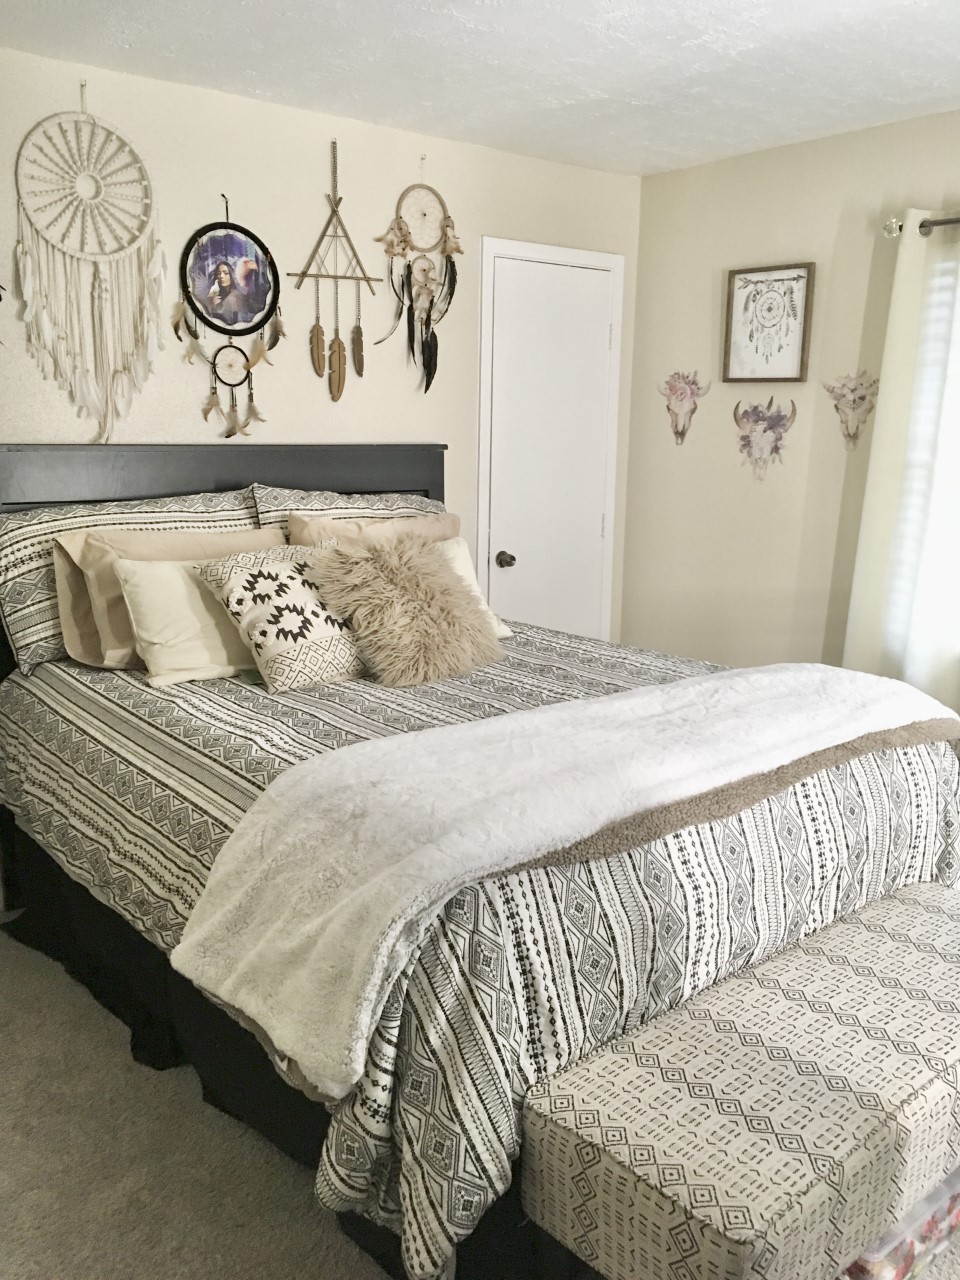 Friendswood home organizing services - bedroom after